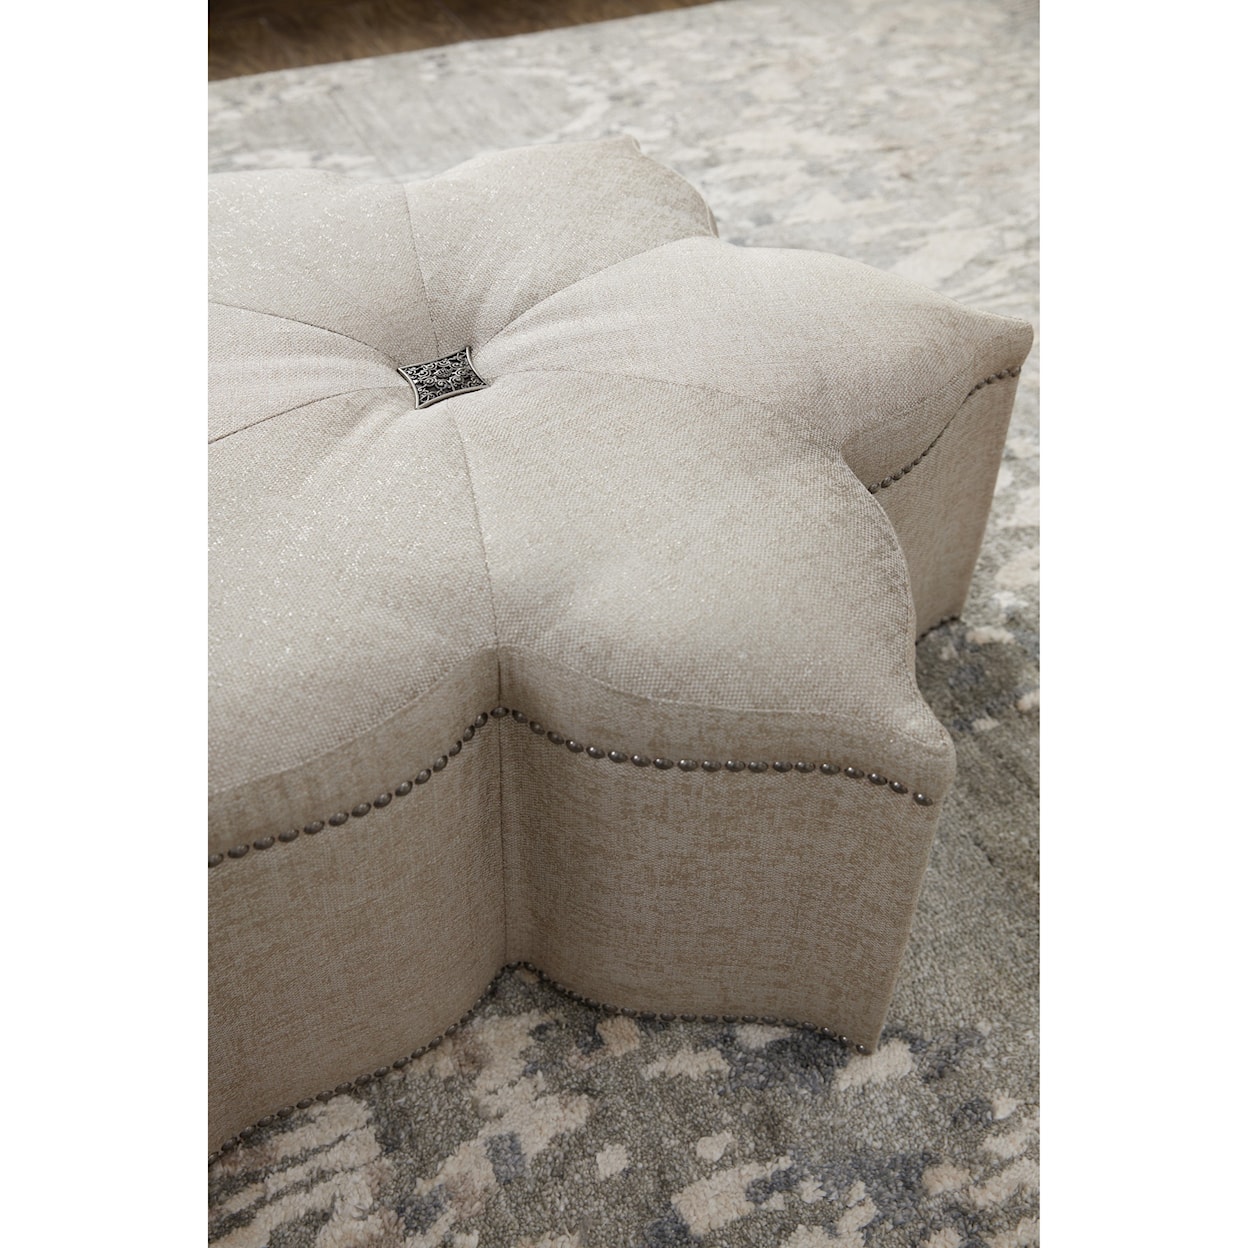 Hooker Furniture Sanctuary Star of the Show Ottoman